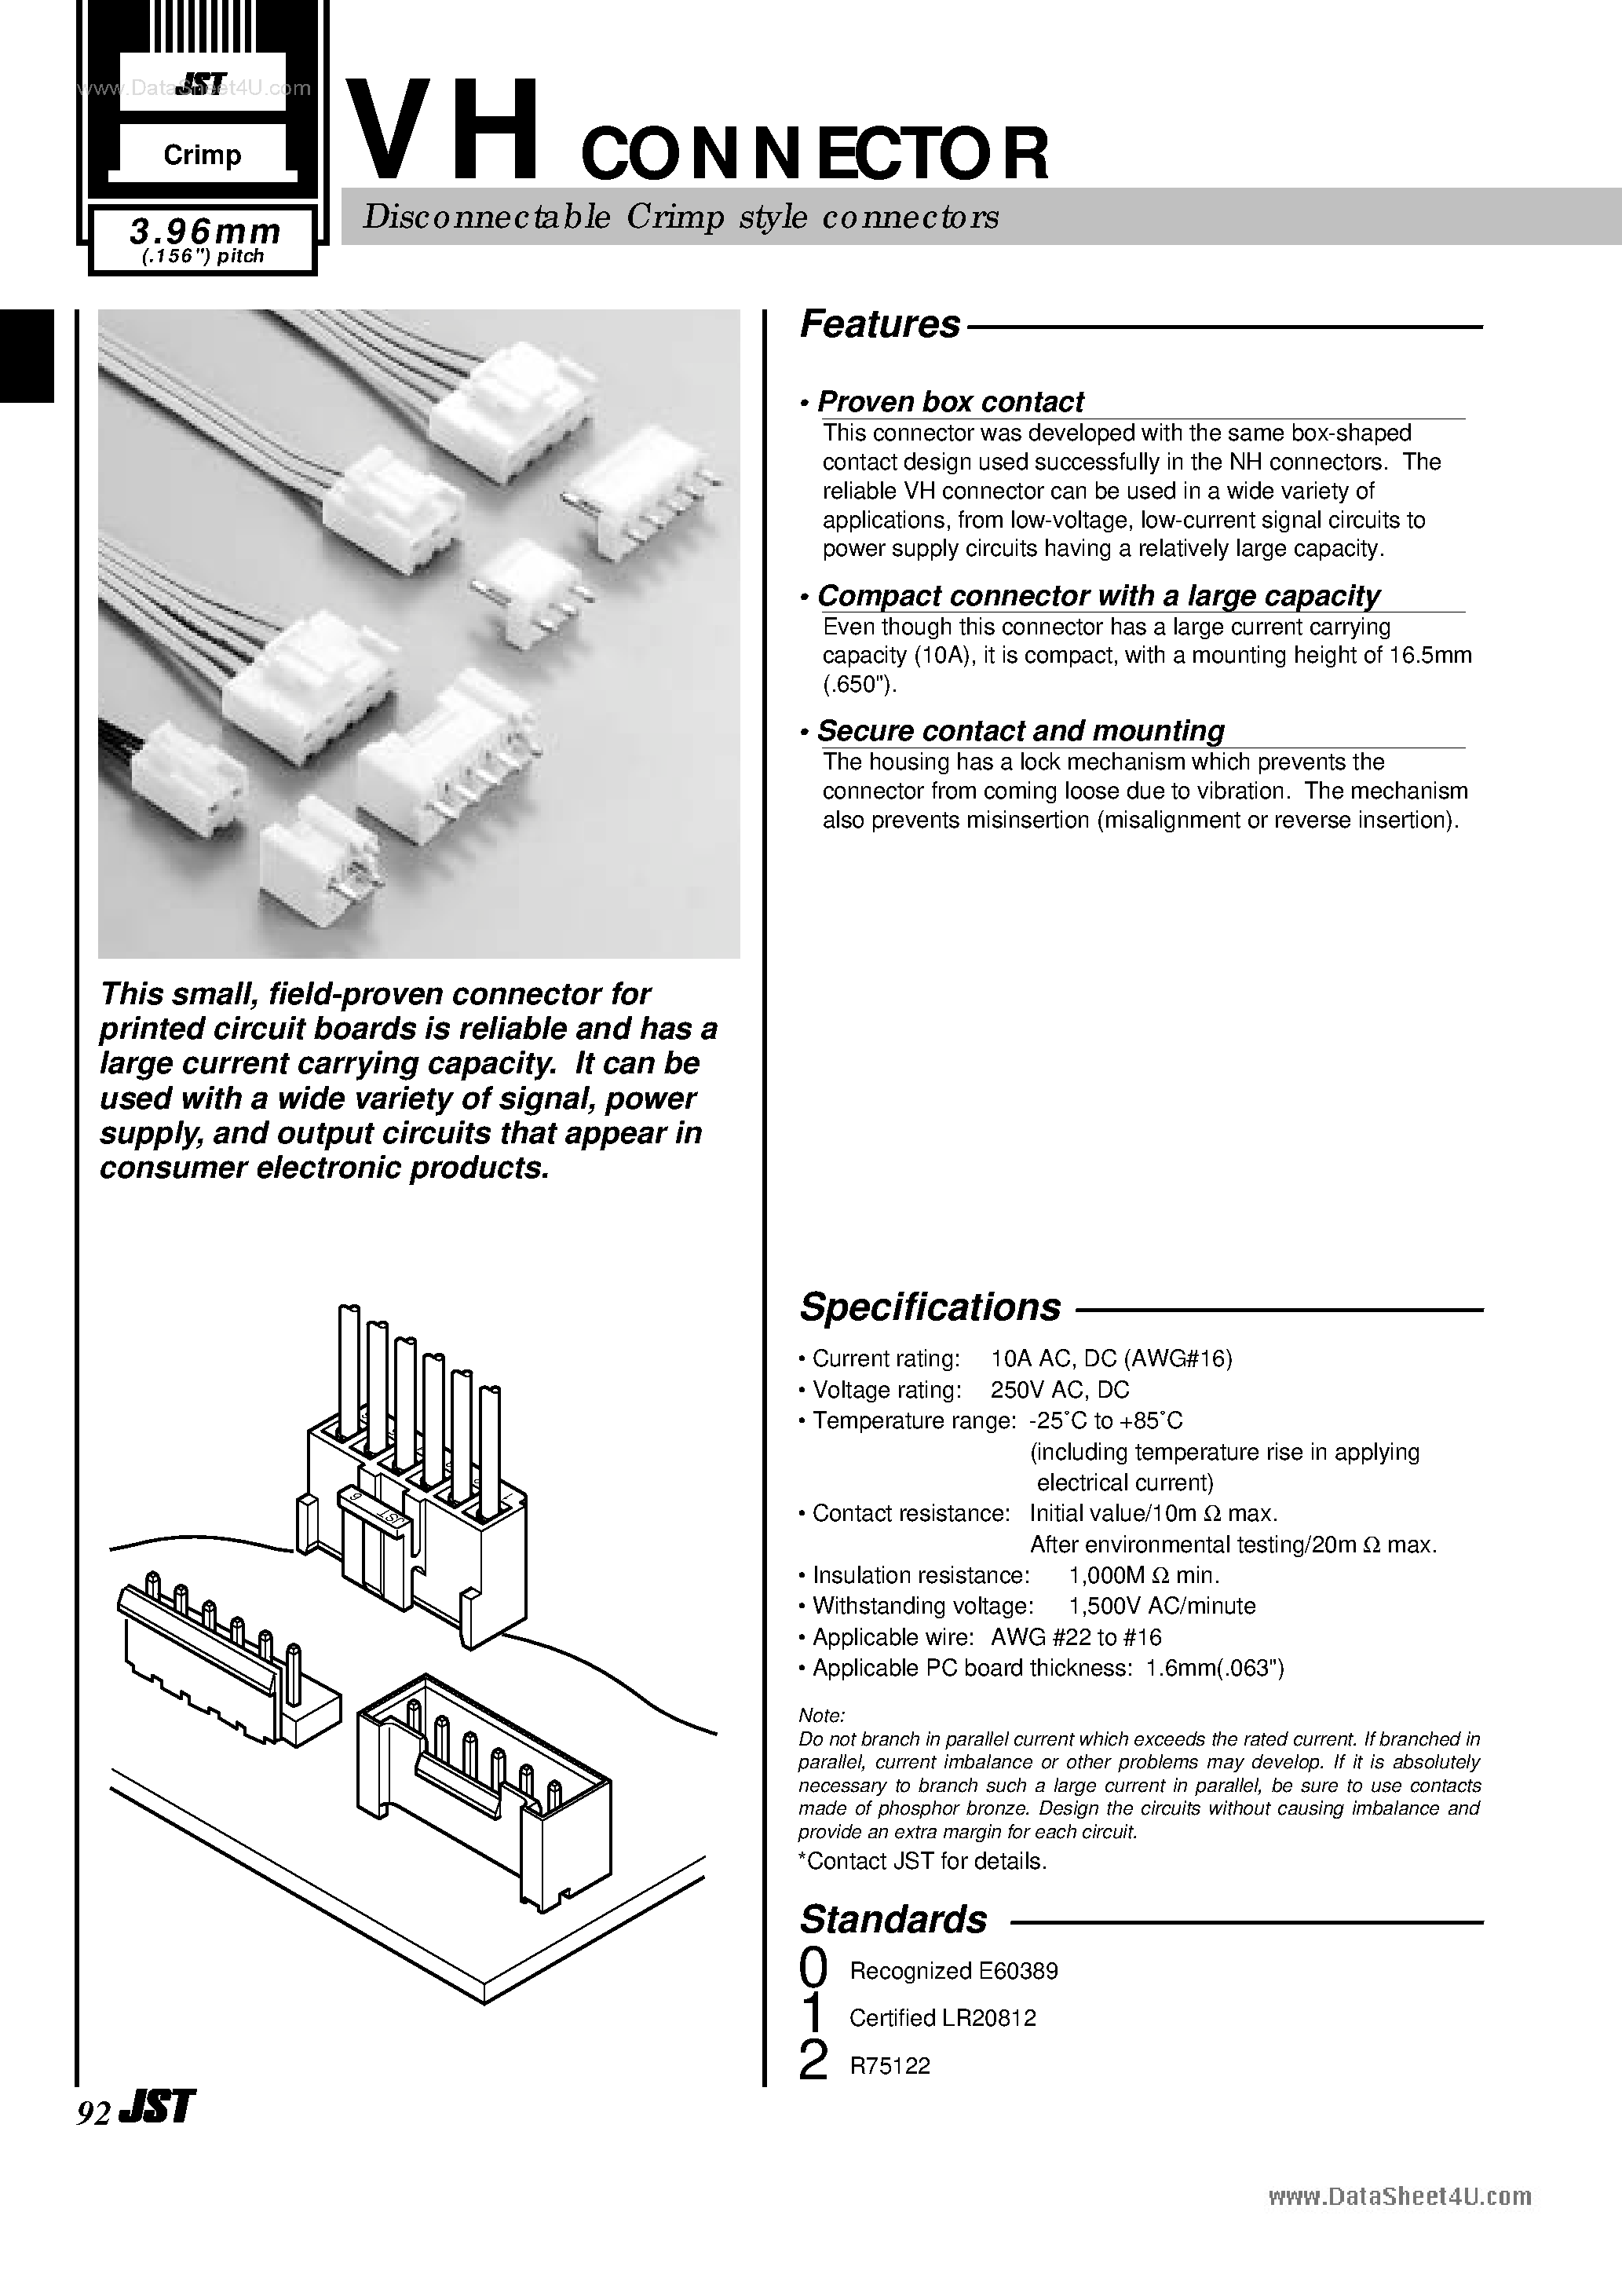 Datasheet B4P-VH - VH Connector page 1